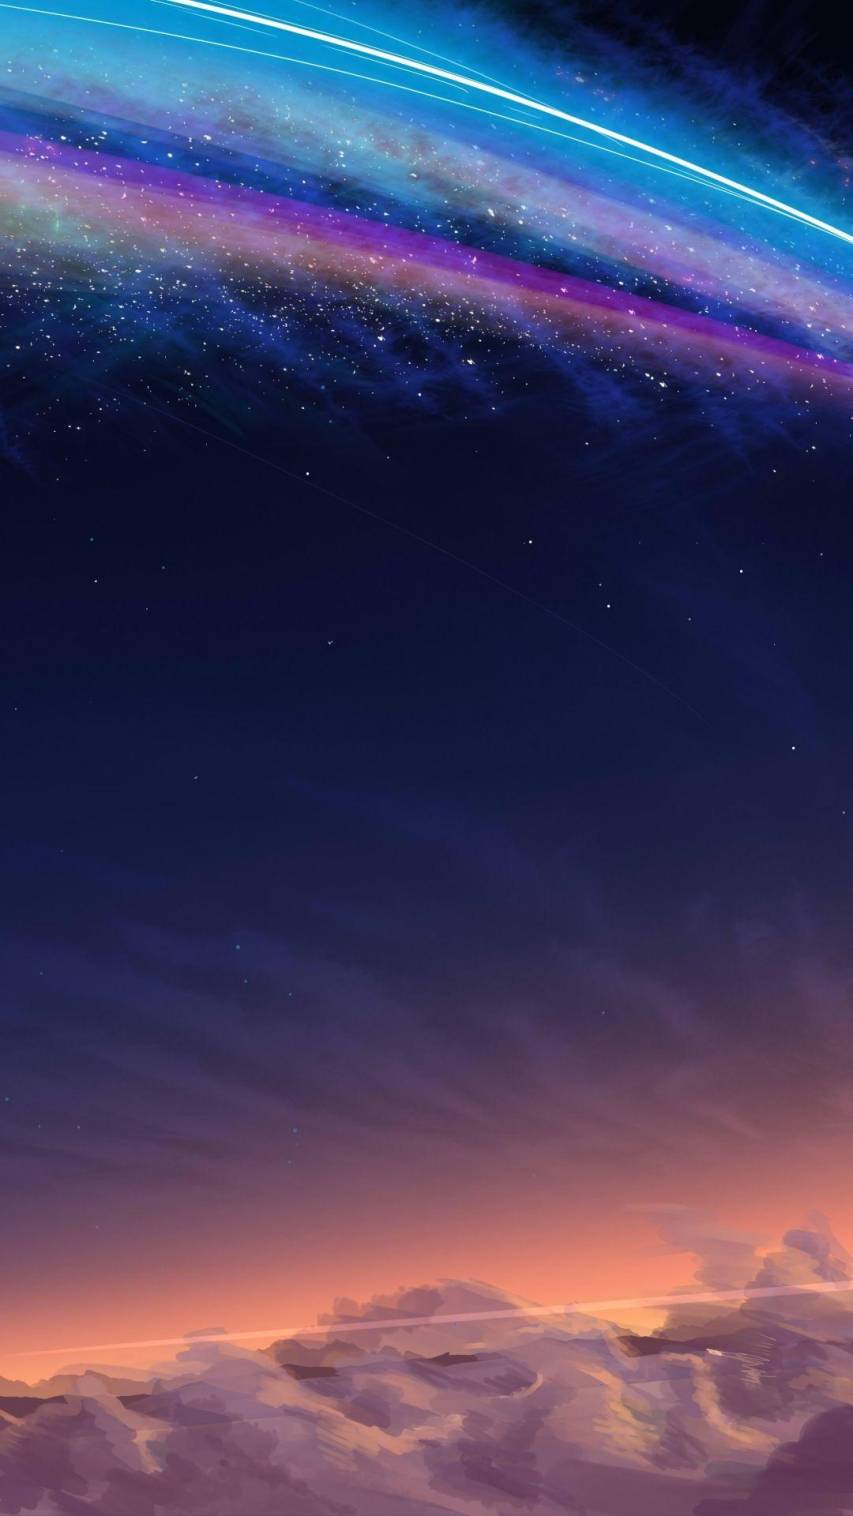 Your Name iPhone Picture Backgrounds